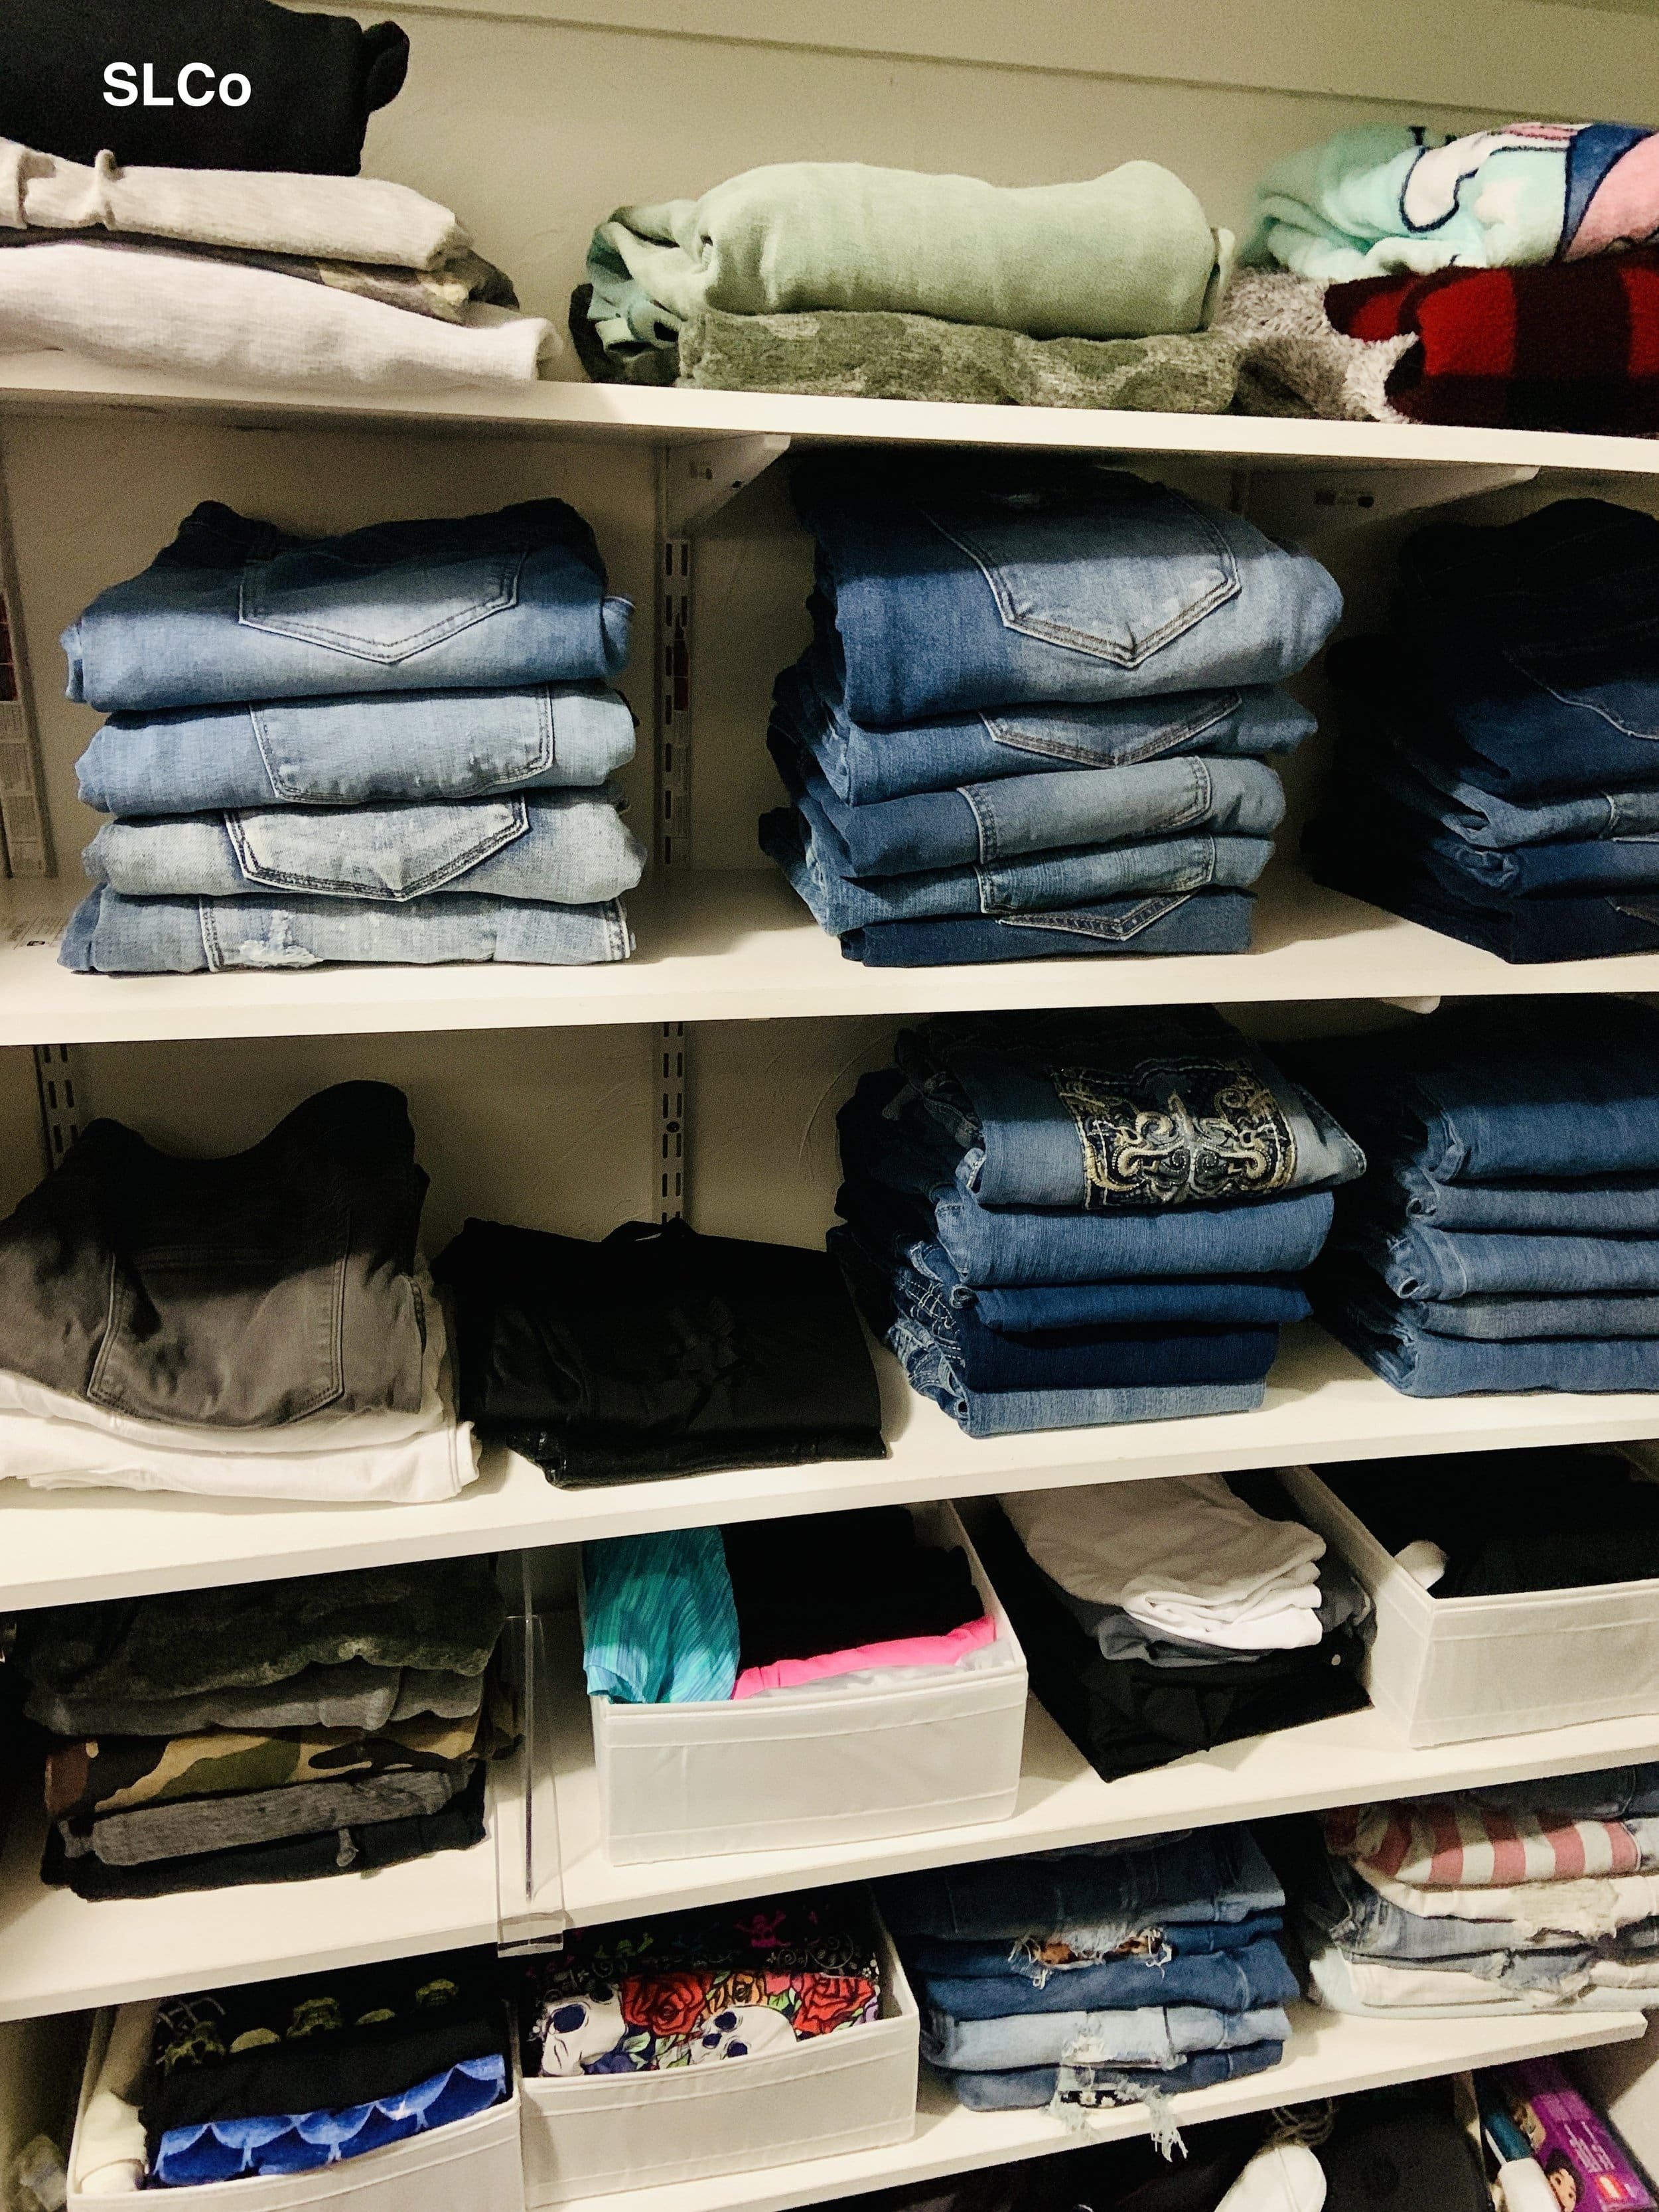 Closer image of shelves with folded jeans and items